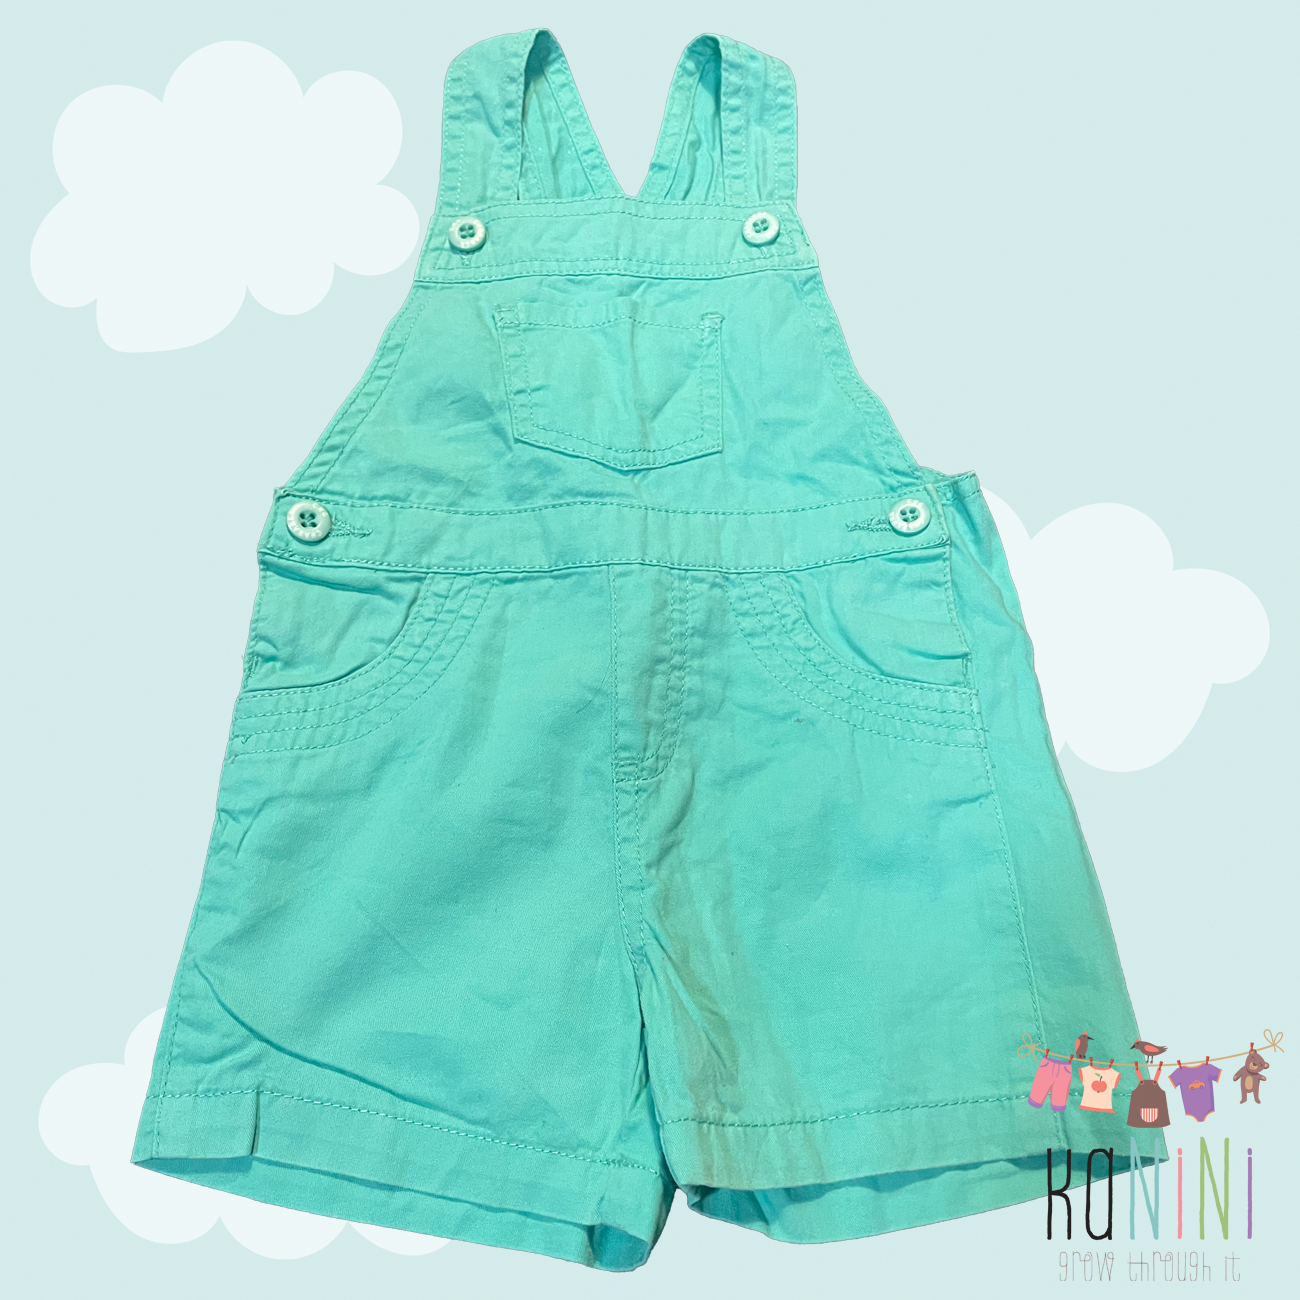 Featured image for “Charanga 6 - 9 Months Boys Turquoise Dungaree”